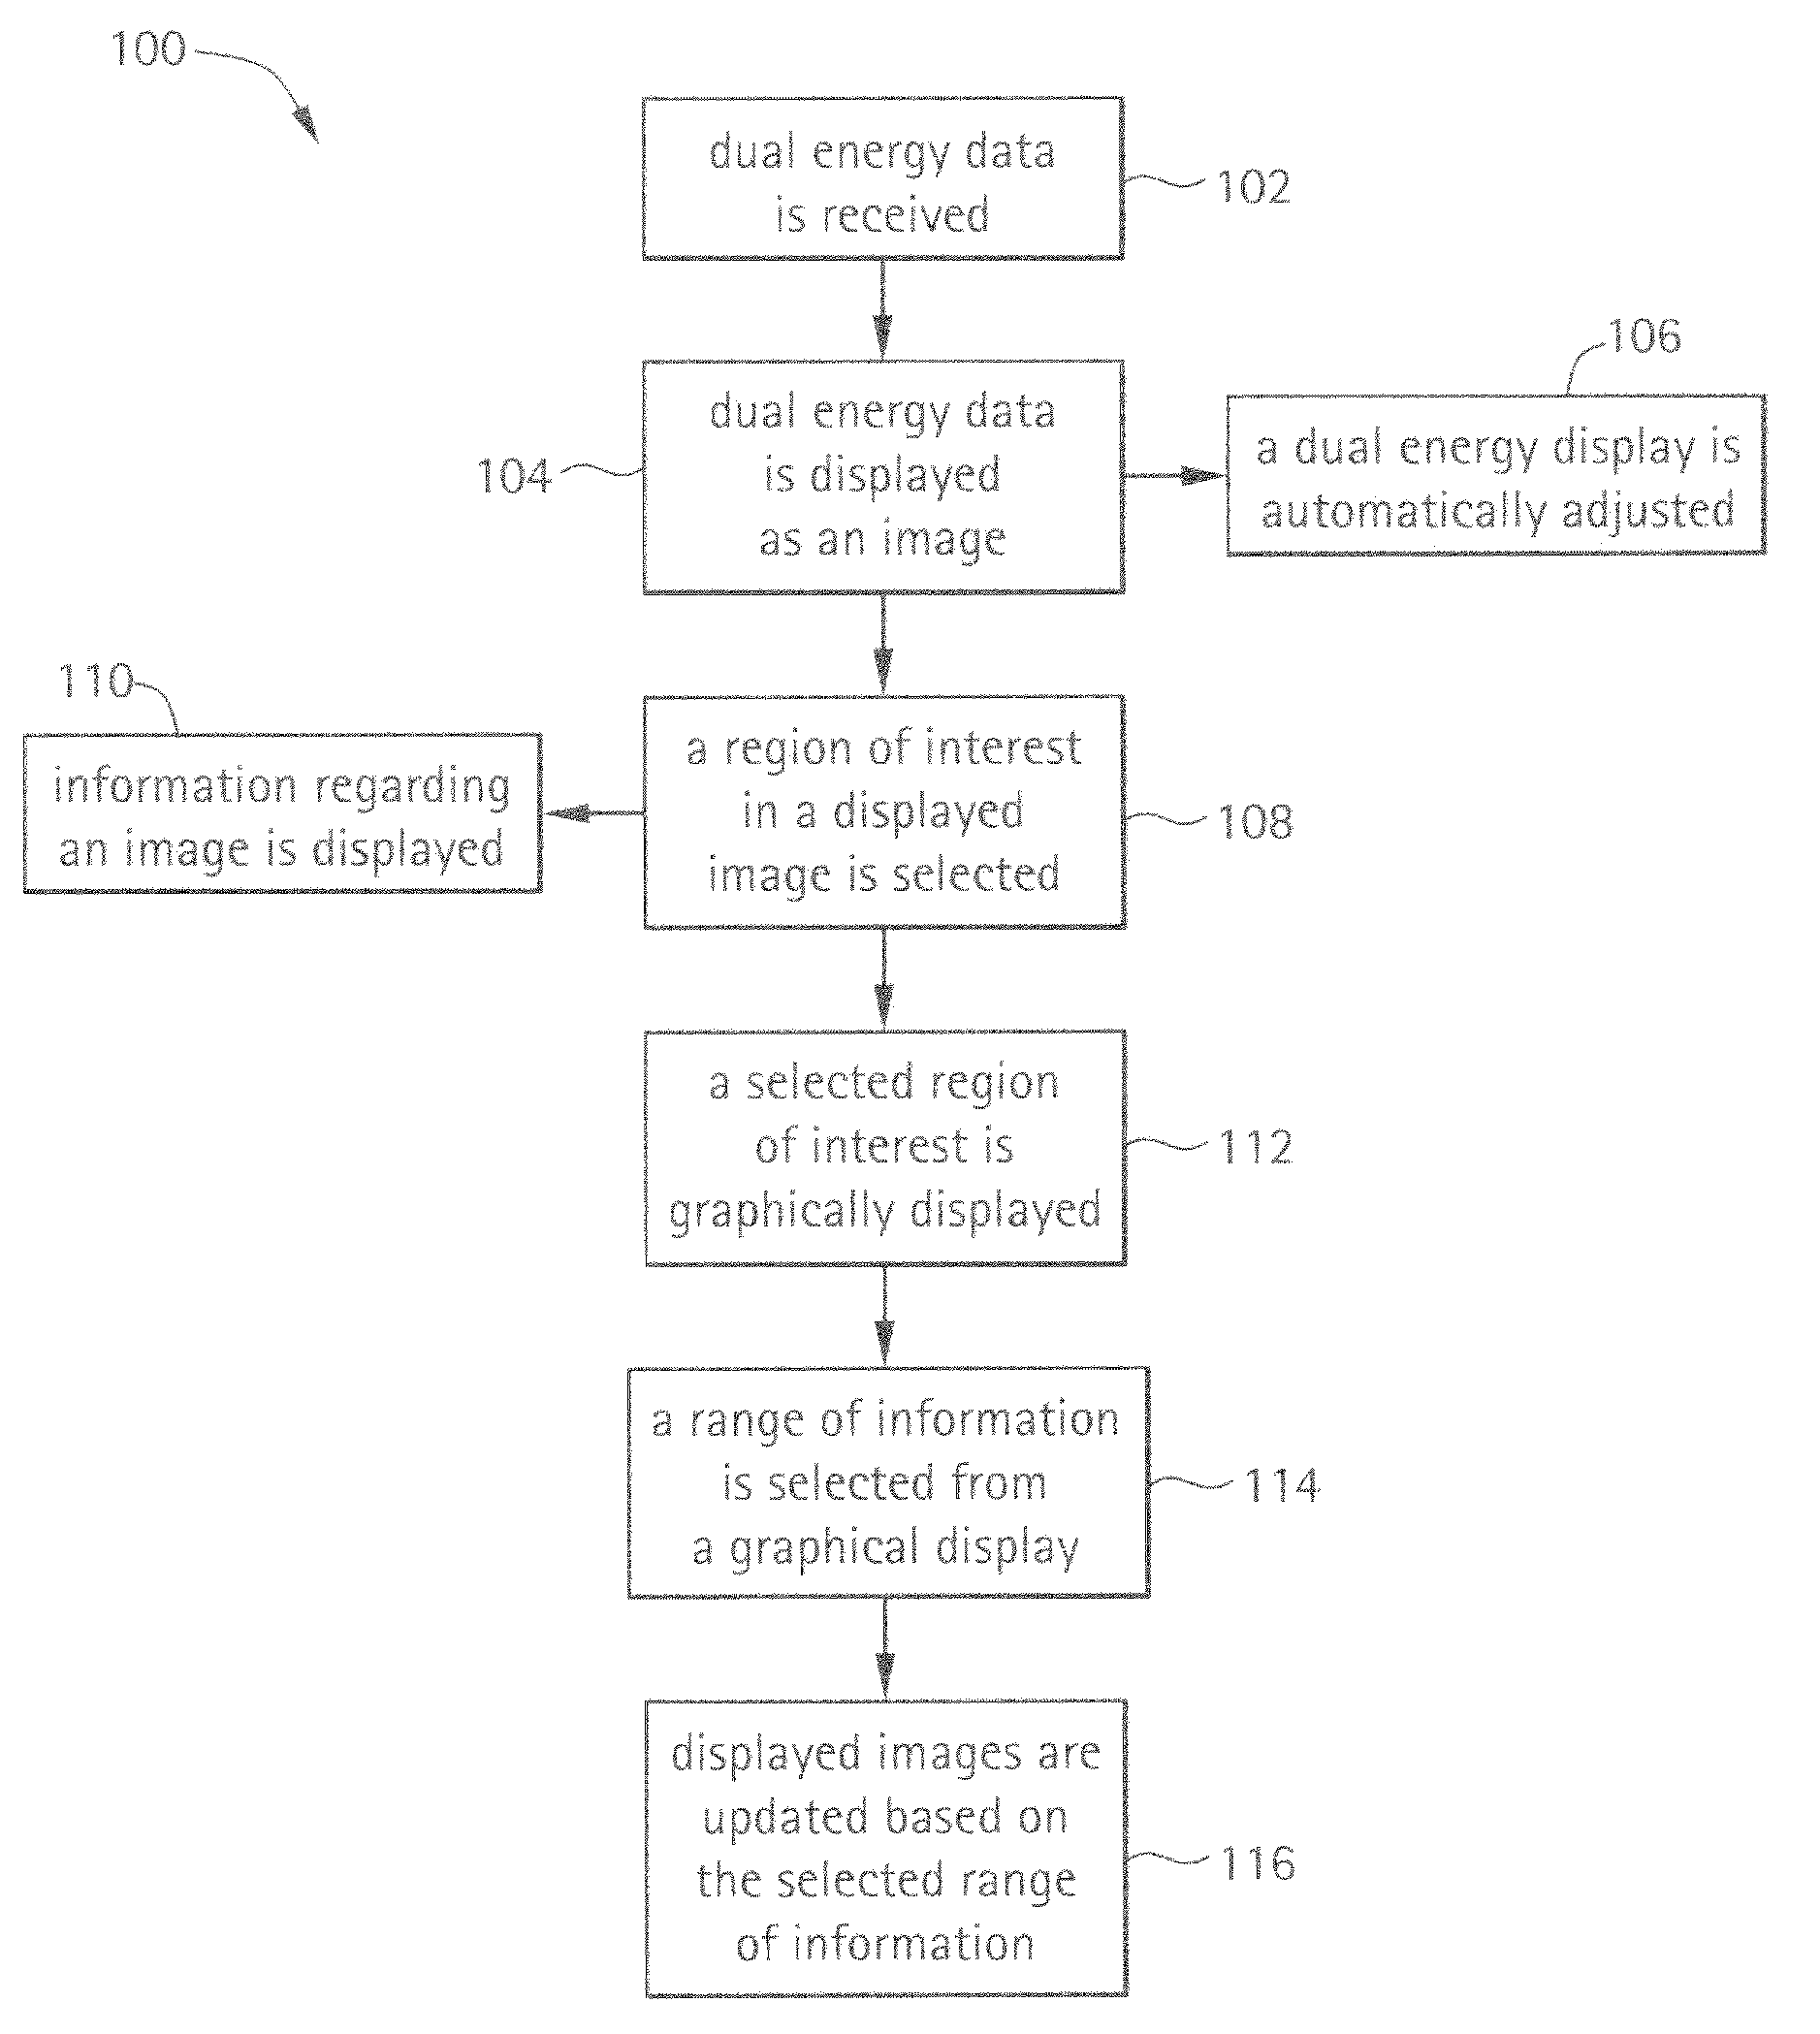 Systems and Methods for Displaying Multi-Energy Data